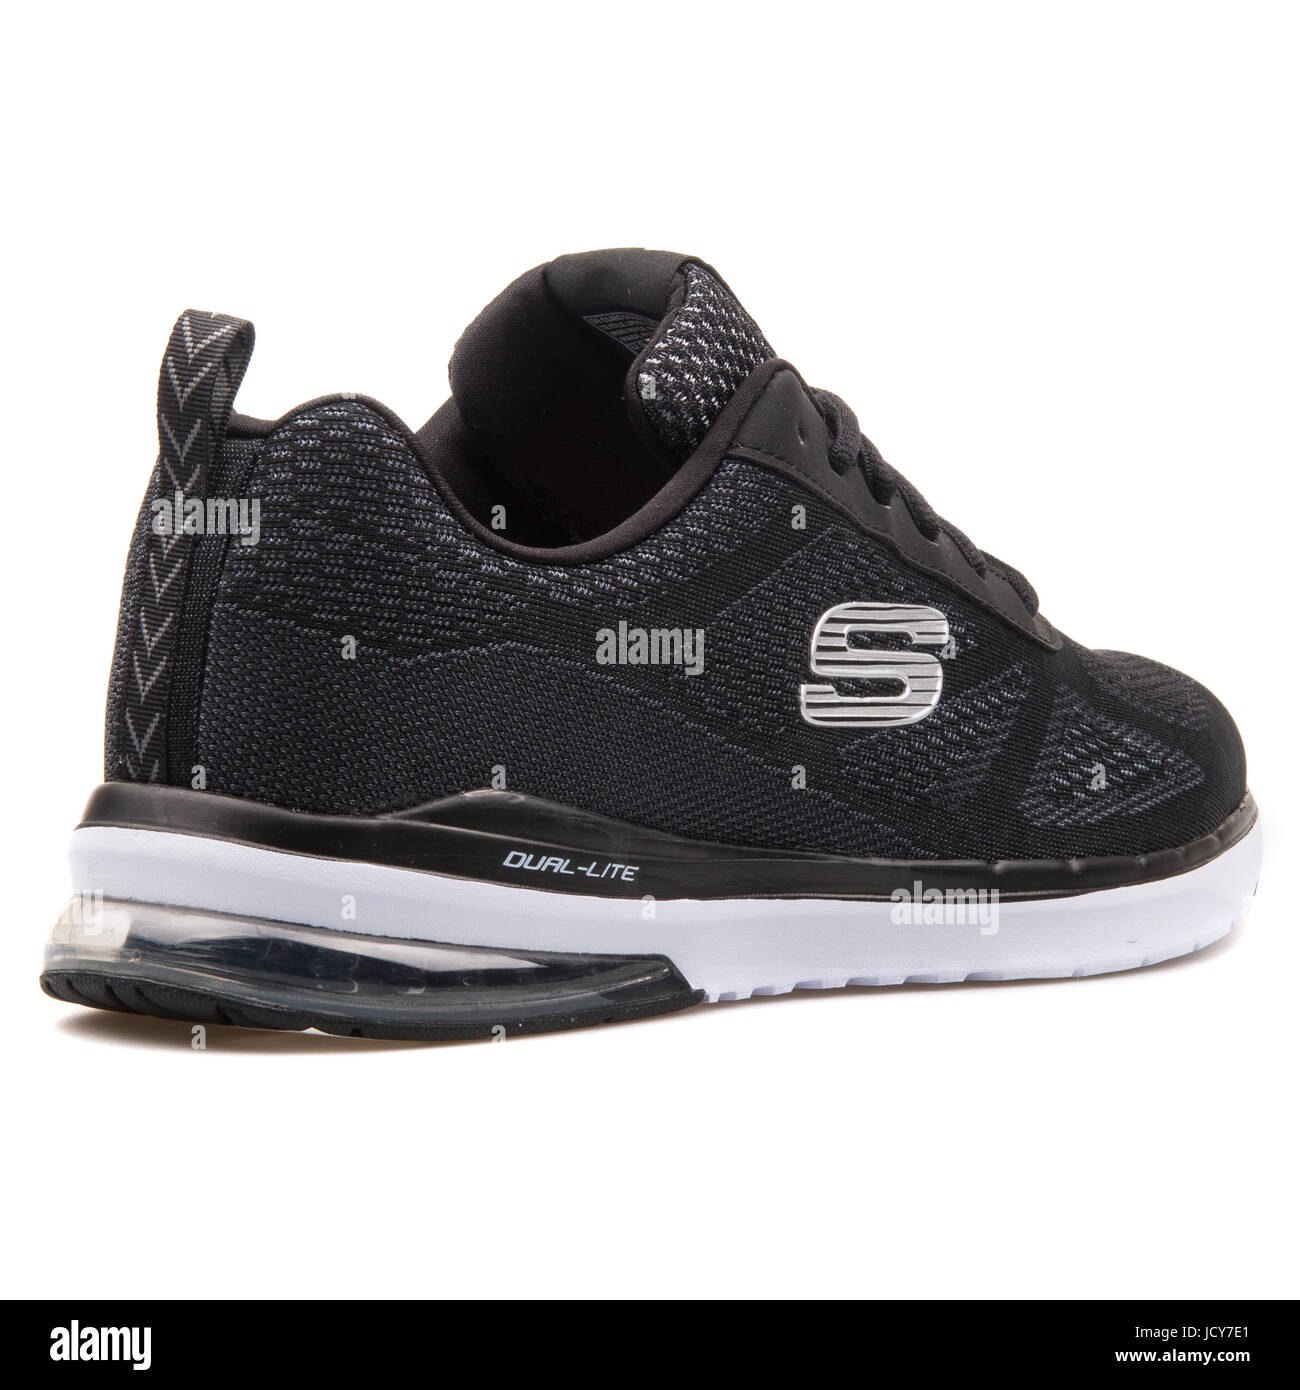 Sketchers Skech-Air Infinity Black and White Men's Running Shoes -  51480-BKW Stock Photo - Alamy